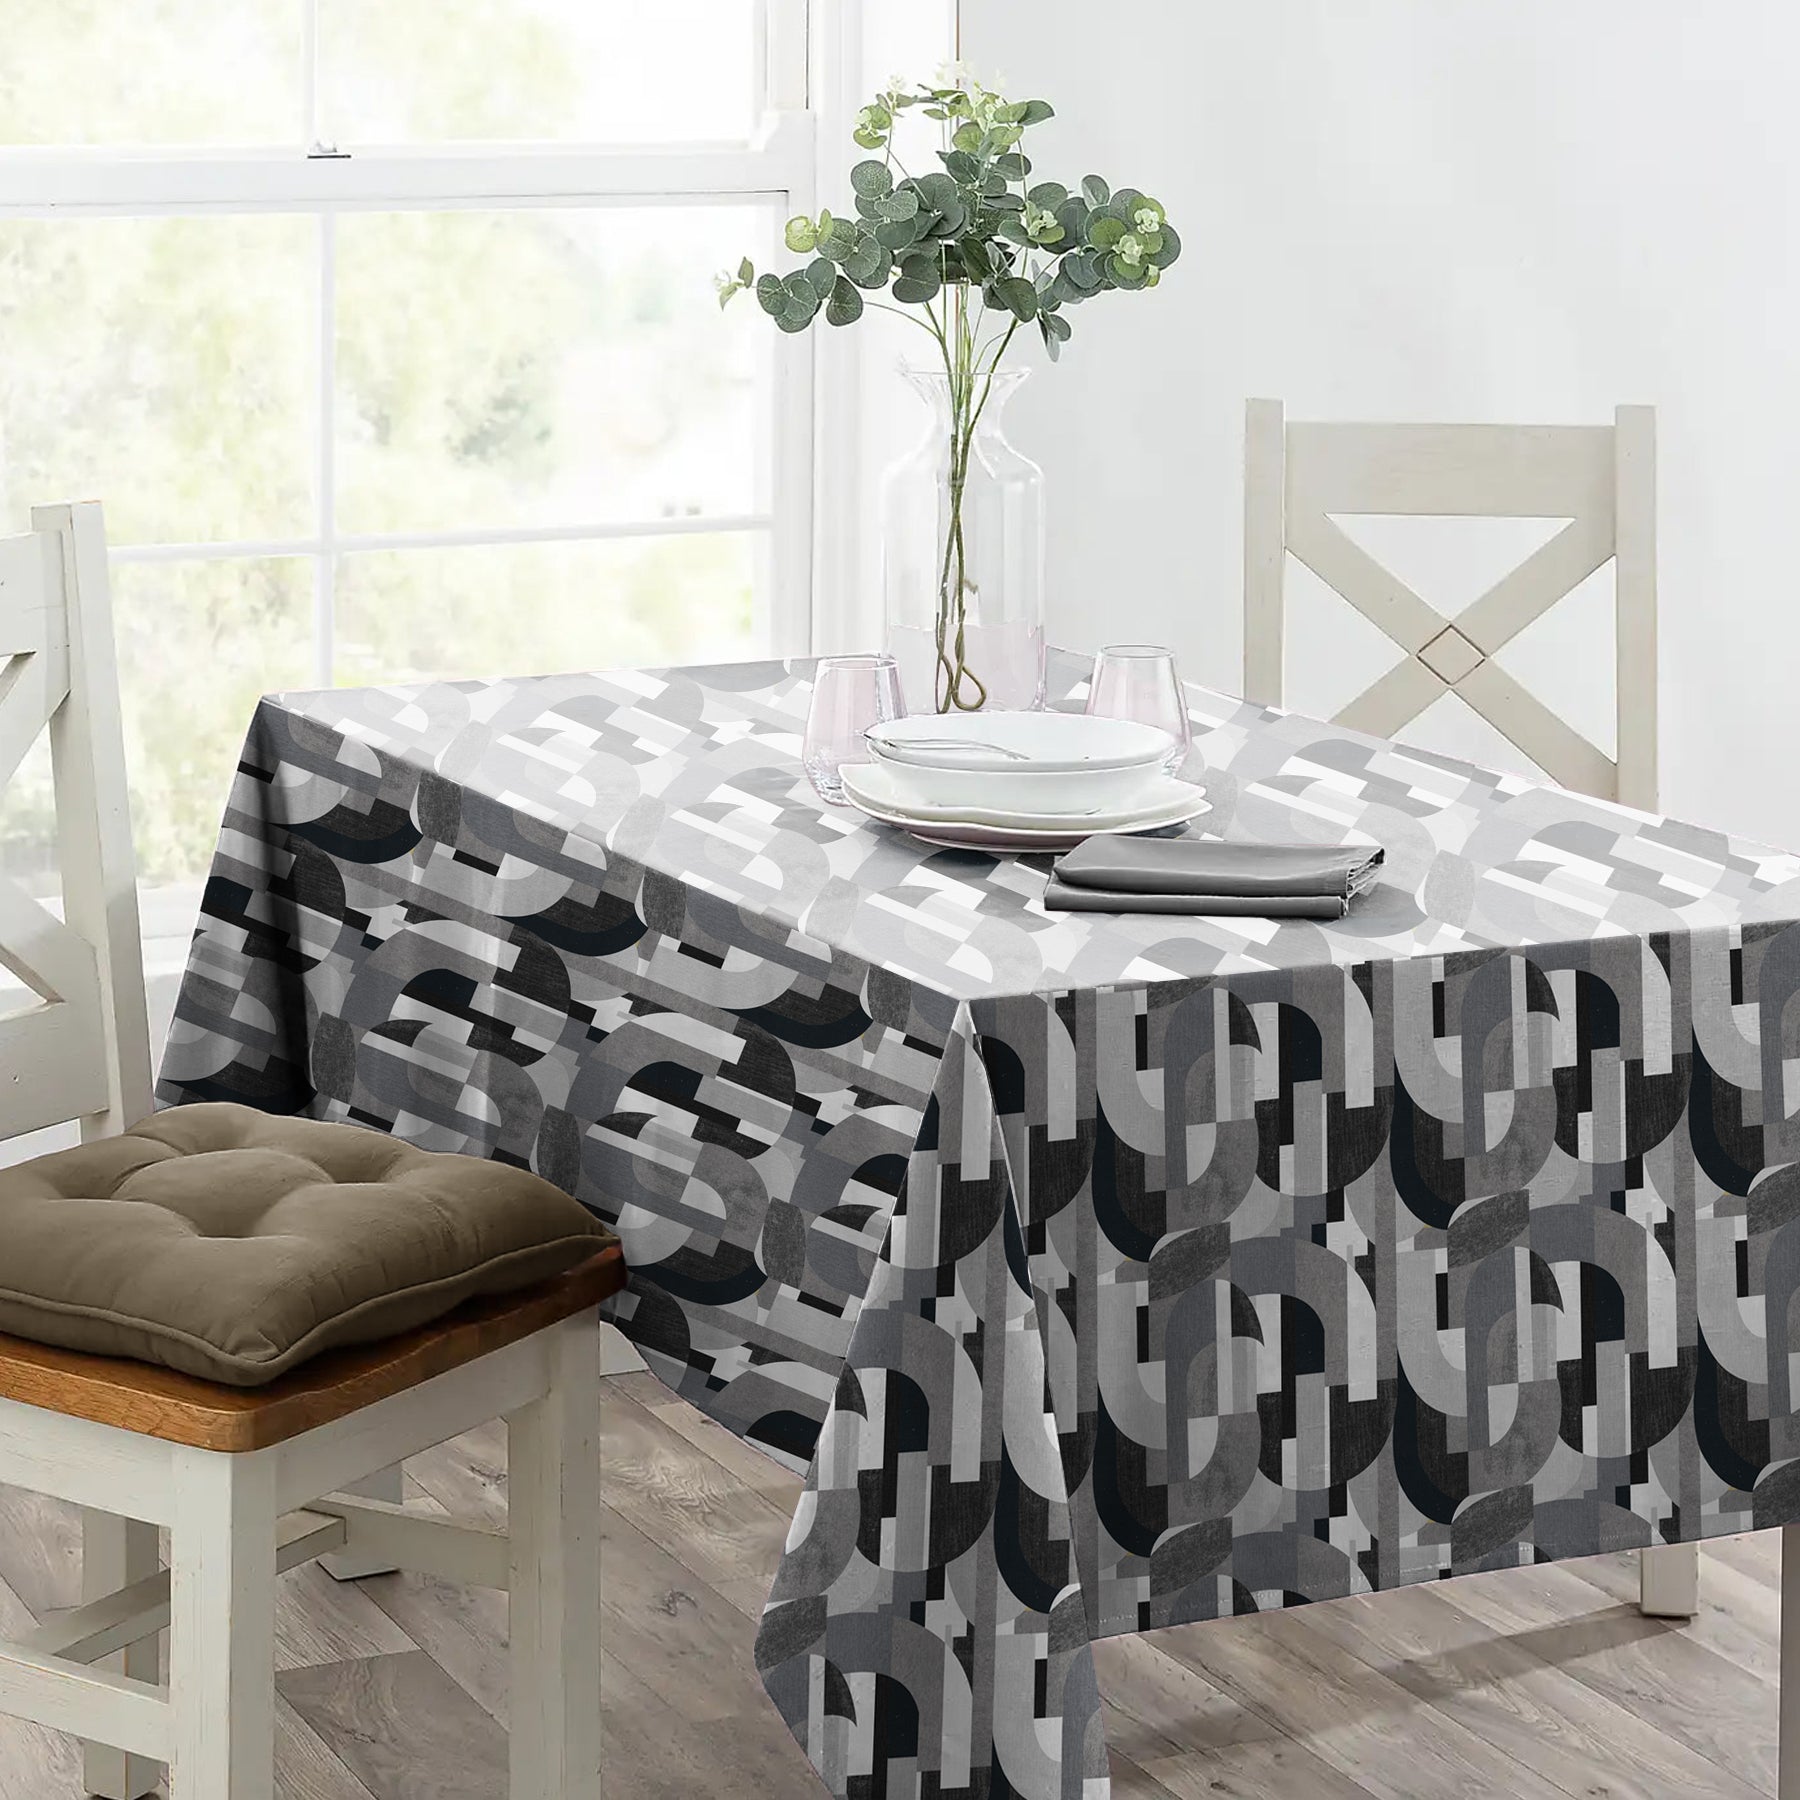 ILLUSION CURVES 6 SEATER TABLE CLOTH BLACK/GREY